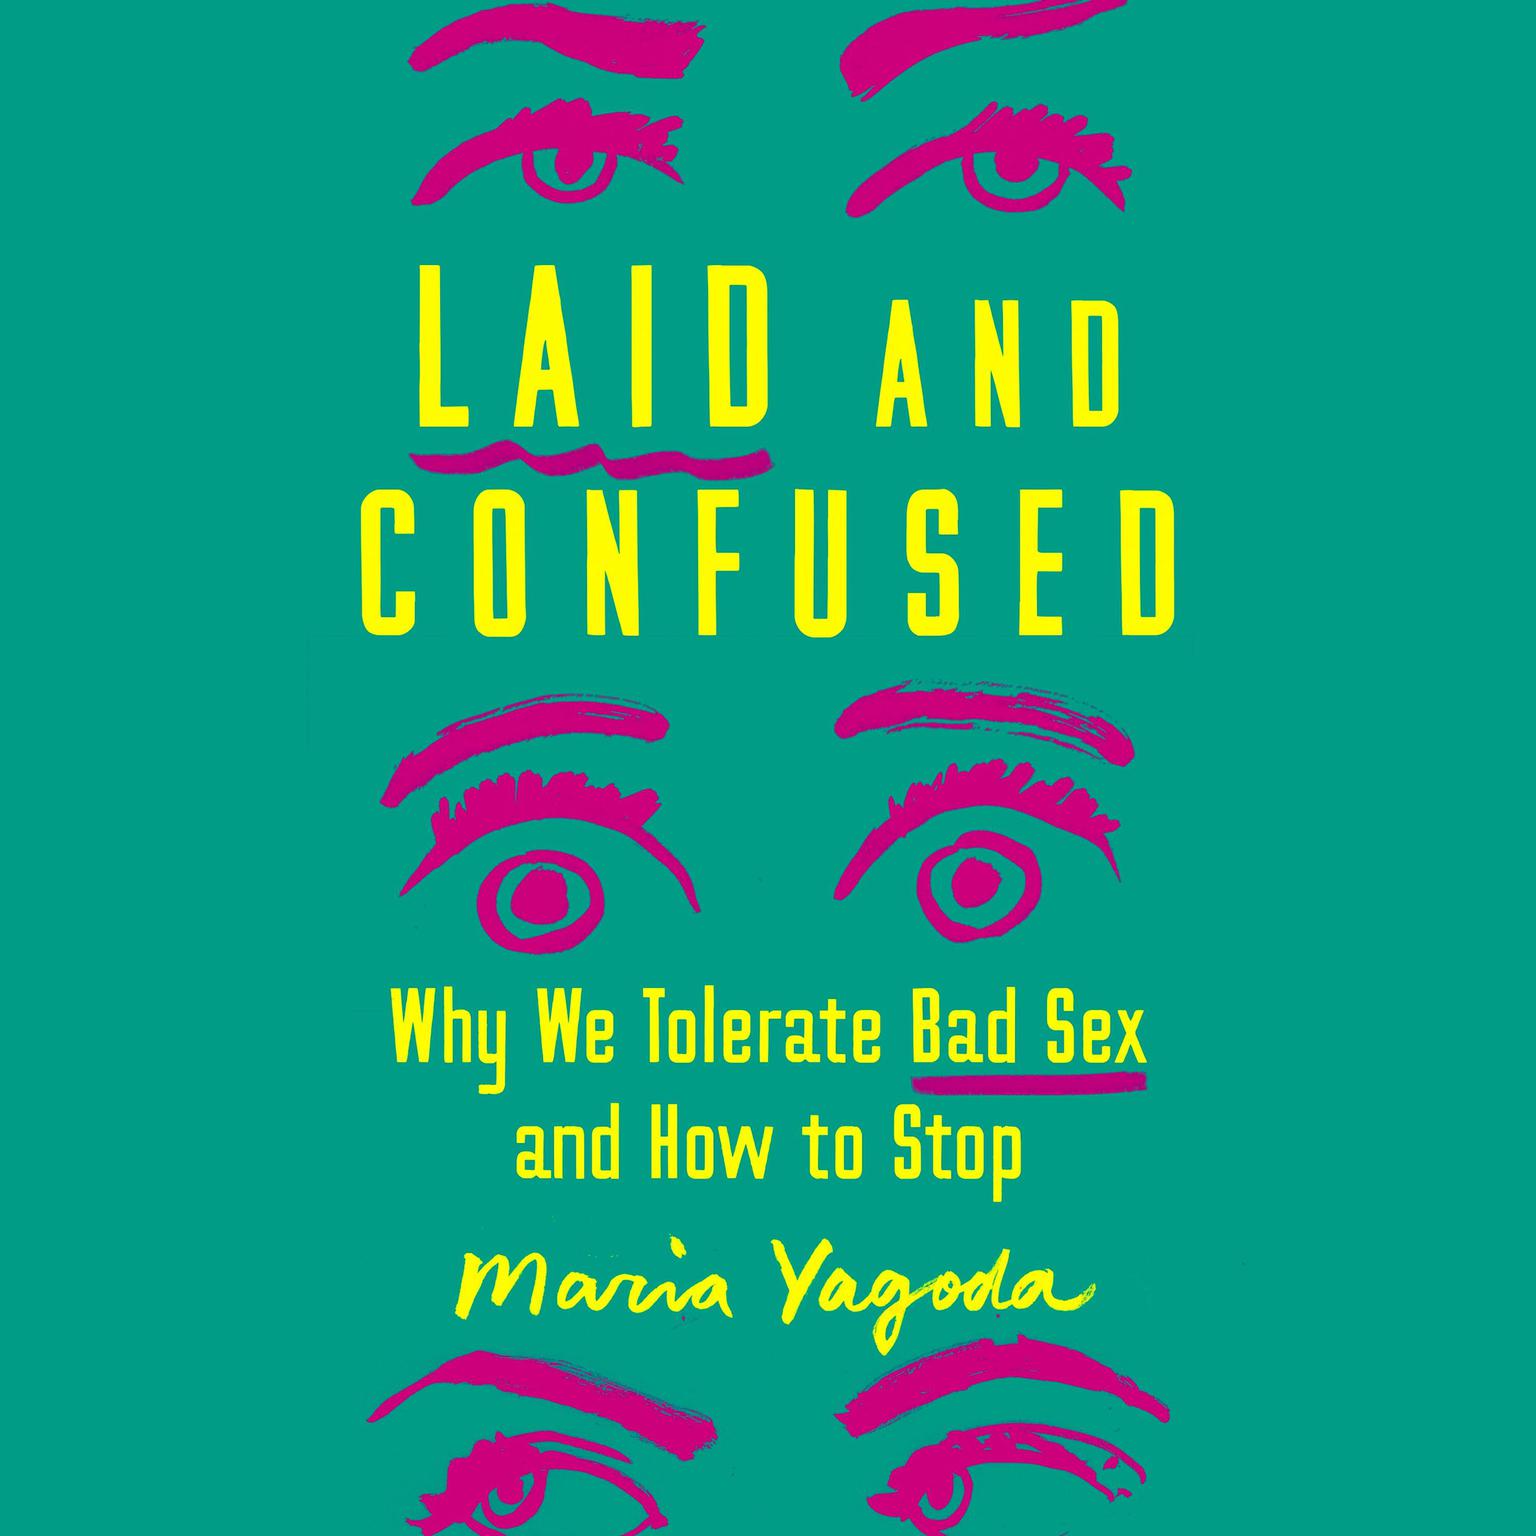 Laid and Confused: Why We Tolerate Bad Sex and How to Stop Audiobook, by Maria Yagoda